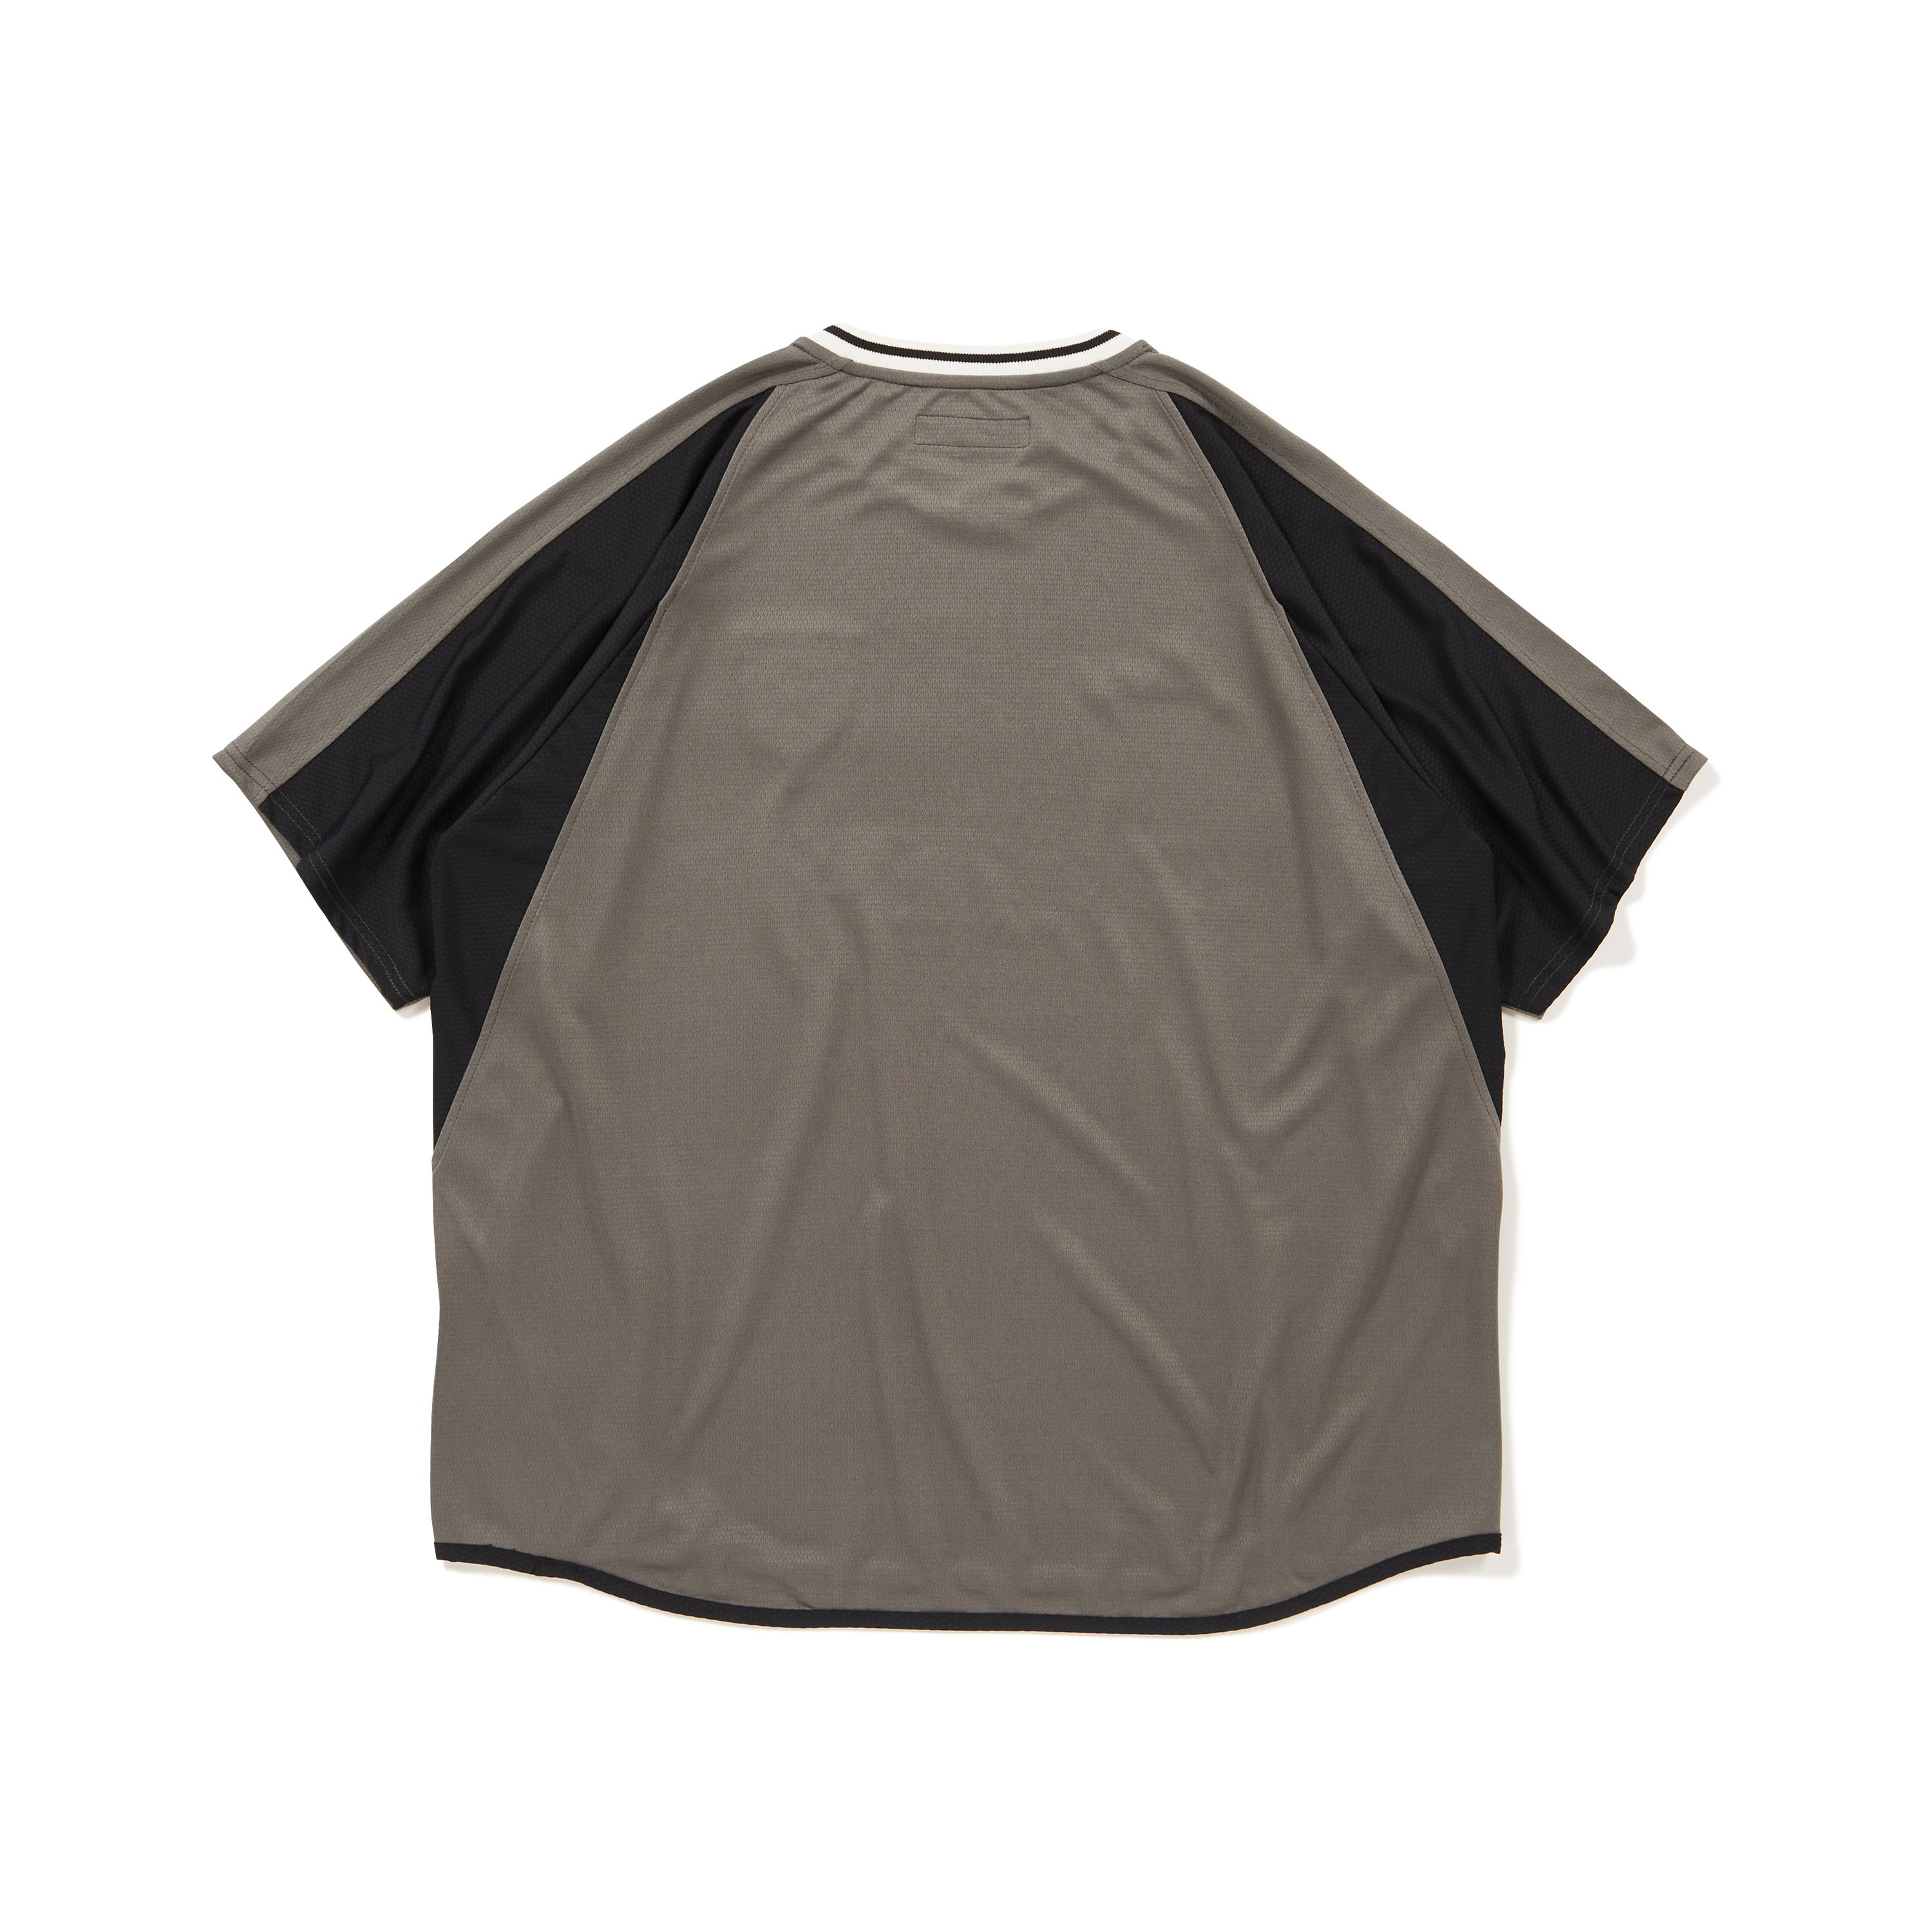 DEESP ATHLETIC JERSEY｜CHARCOAL